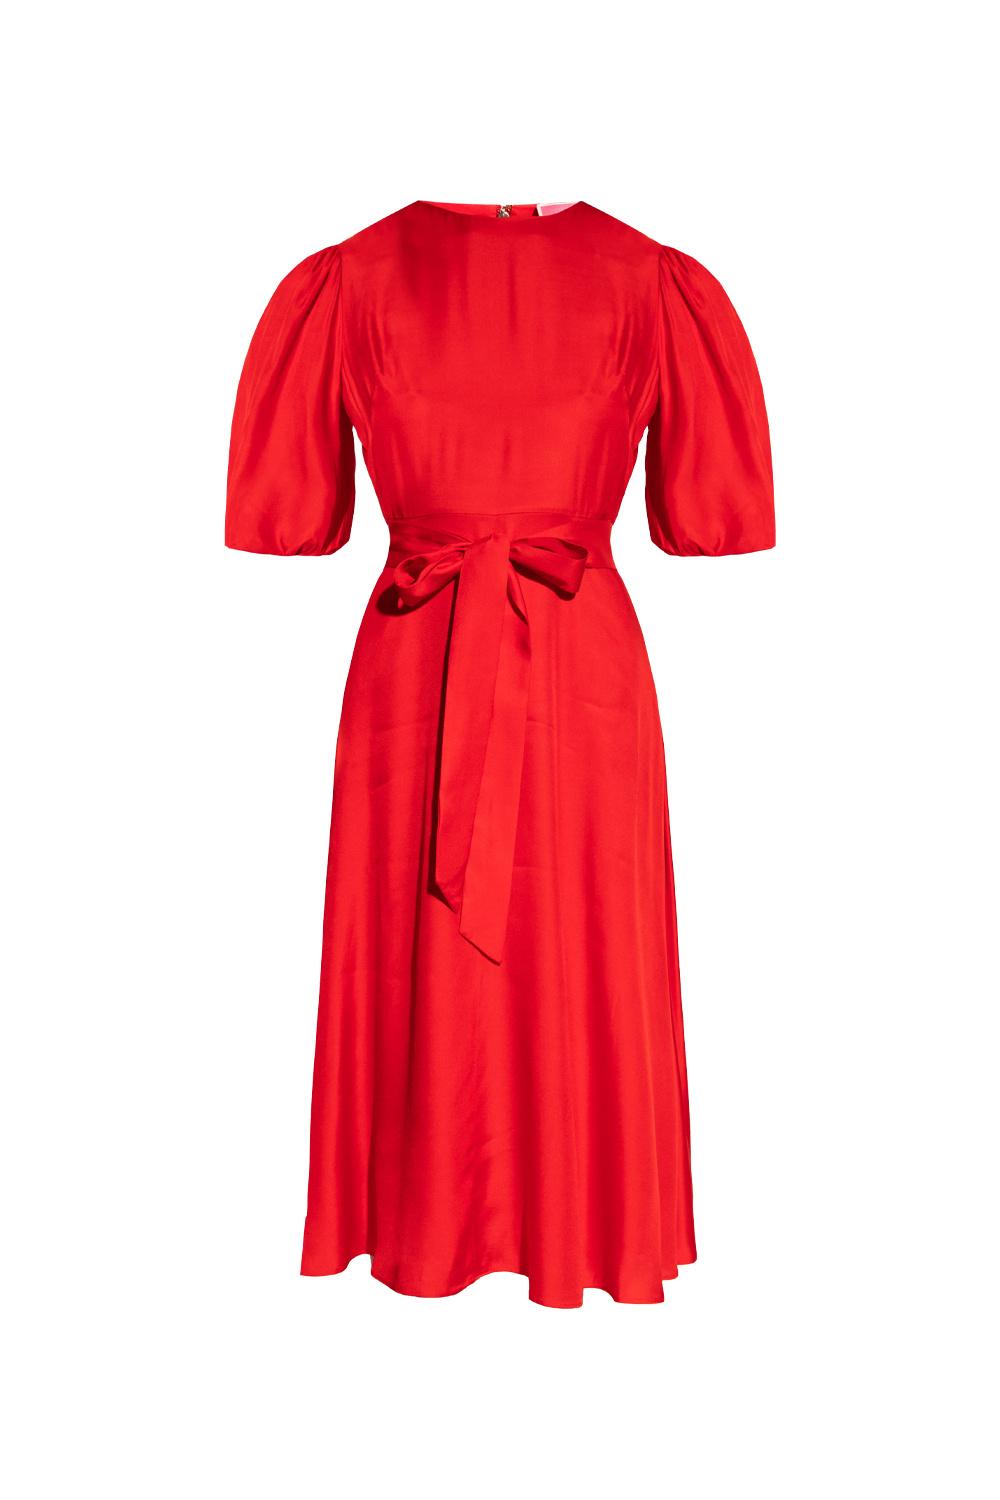 Kate Spade Dress With Puff Sleeves in Red - Lyst